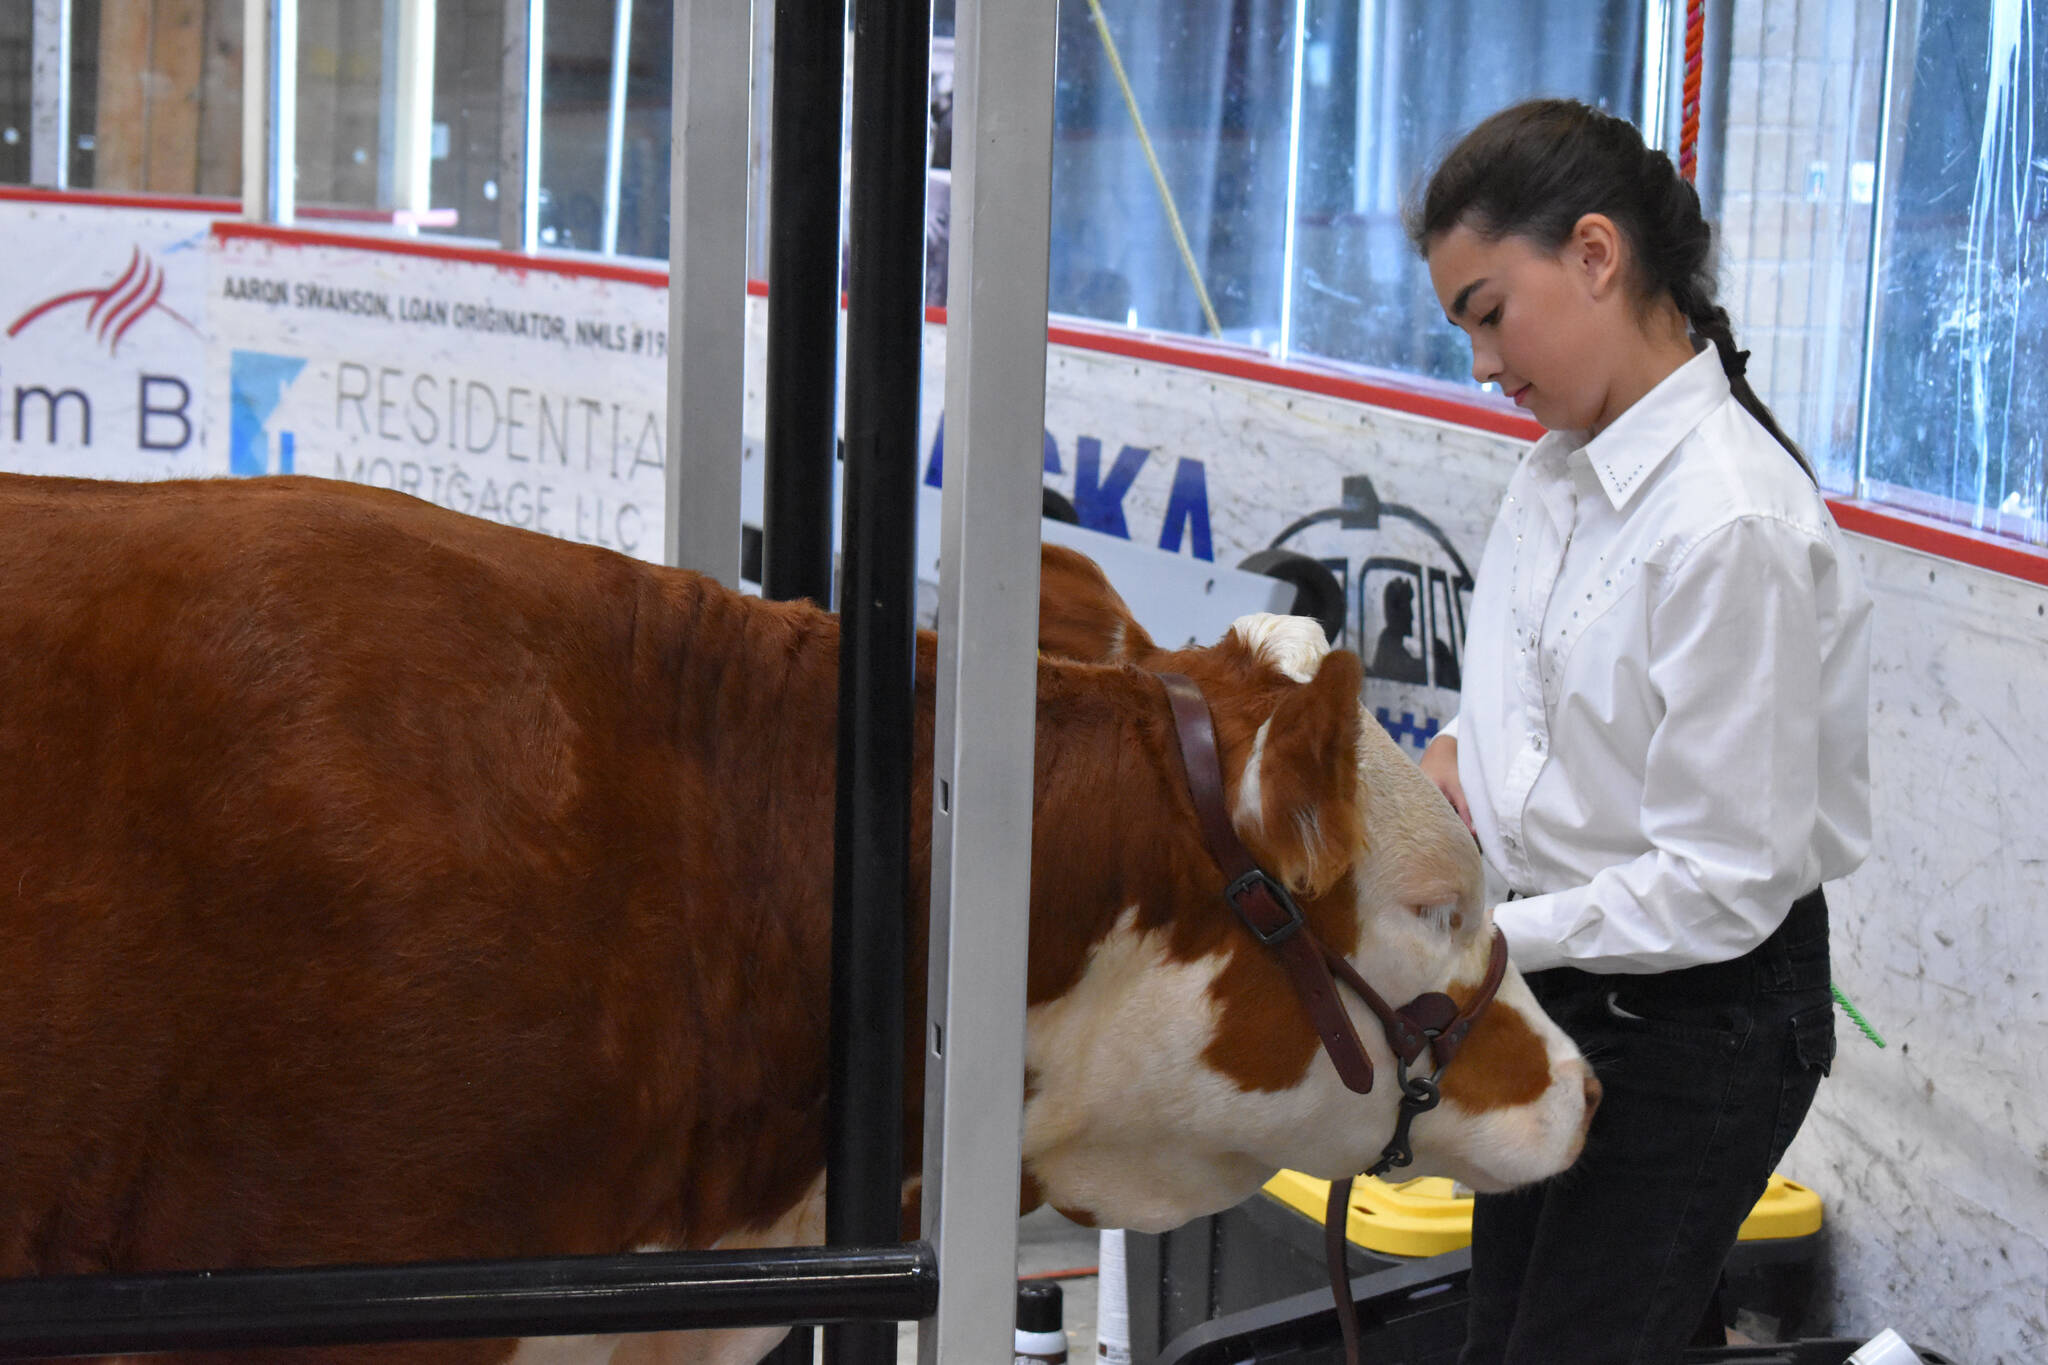 Rayna Reynolds tends to her cow at the 4-H Agriculture Expo in Soldotna, Alaska, on Aug. 5, 2022. (Jake Dye/Peninsula Clarion)